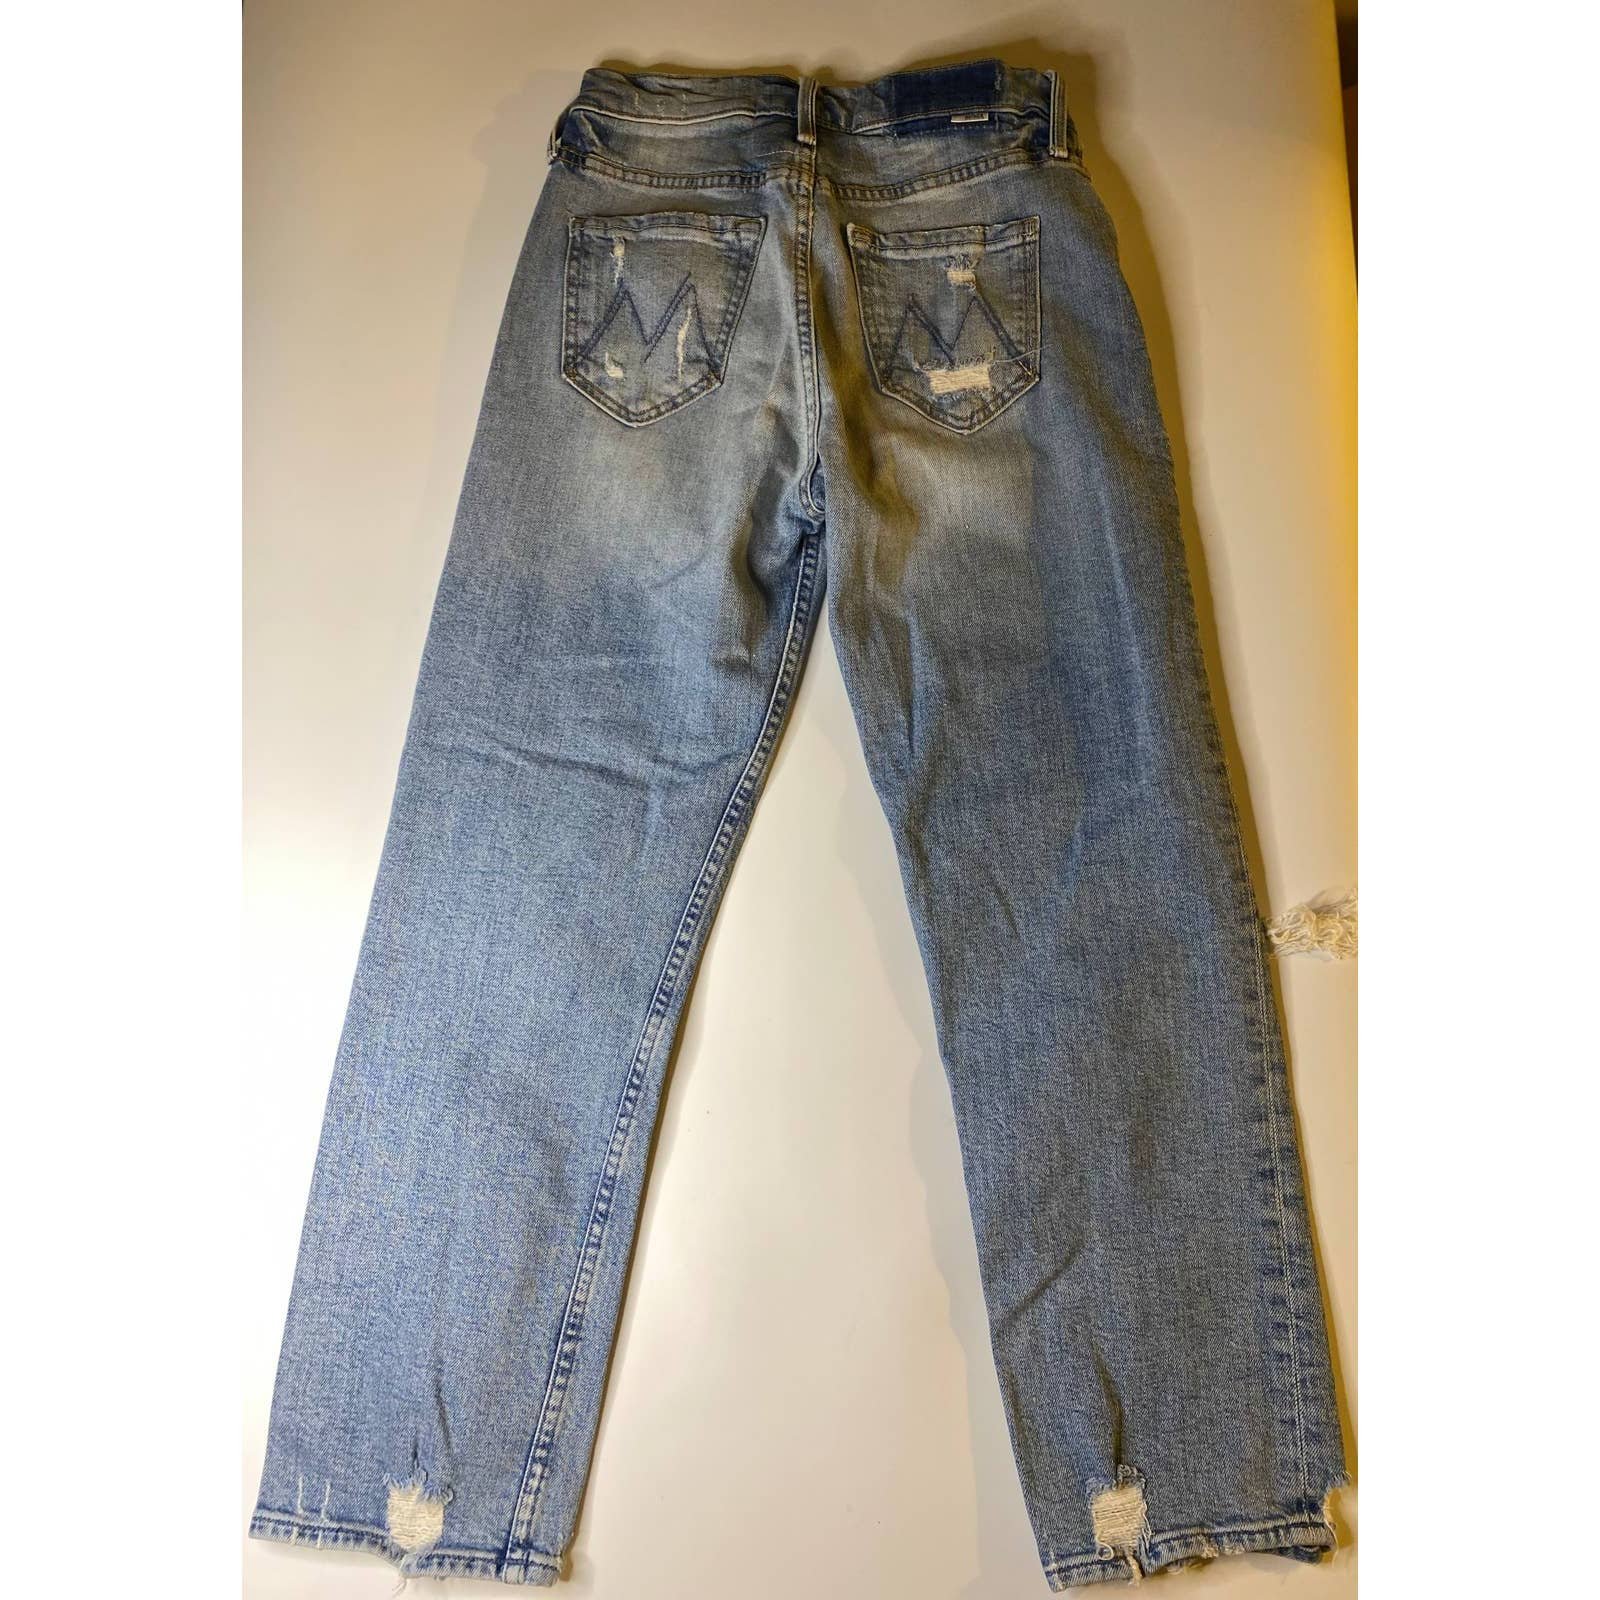 Stylish MOTHER SUPERIOR The Tomcat High-Rise Distressed Jeans Womens Size 25 PmXO7uXcl on sale